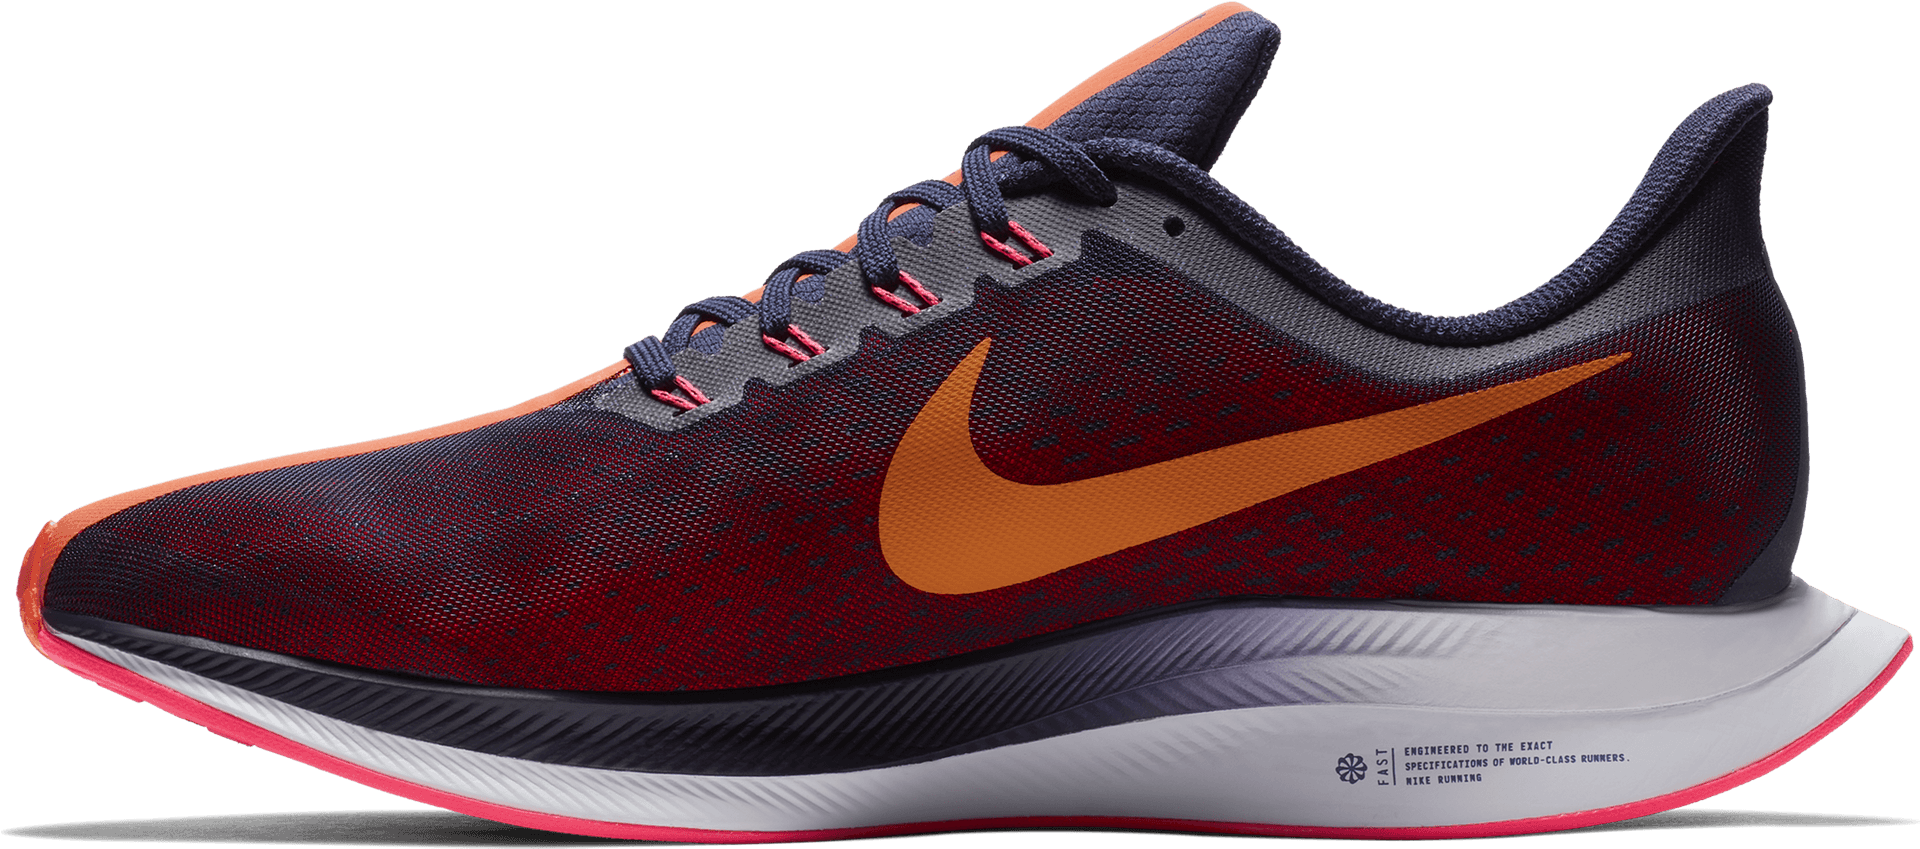 Download Nike Running Shoe Side View | Wallpapers.com